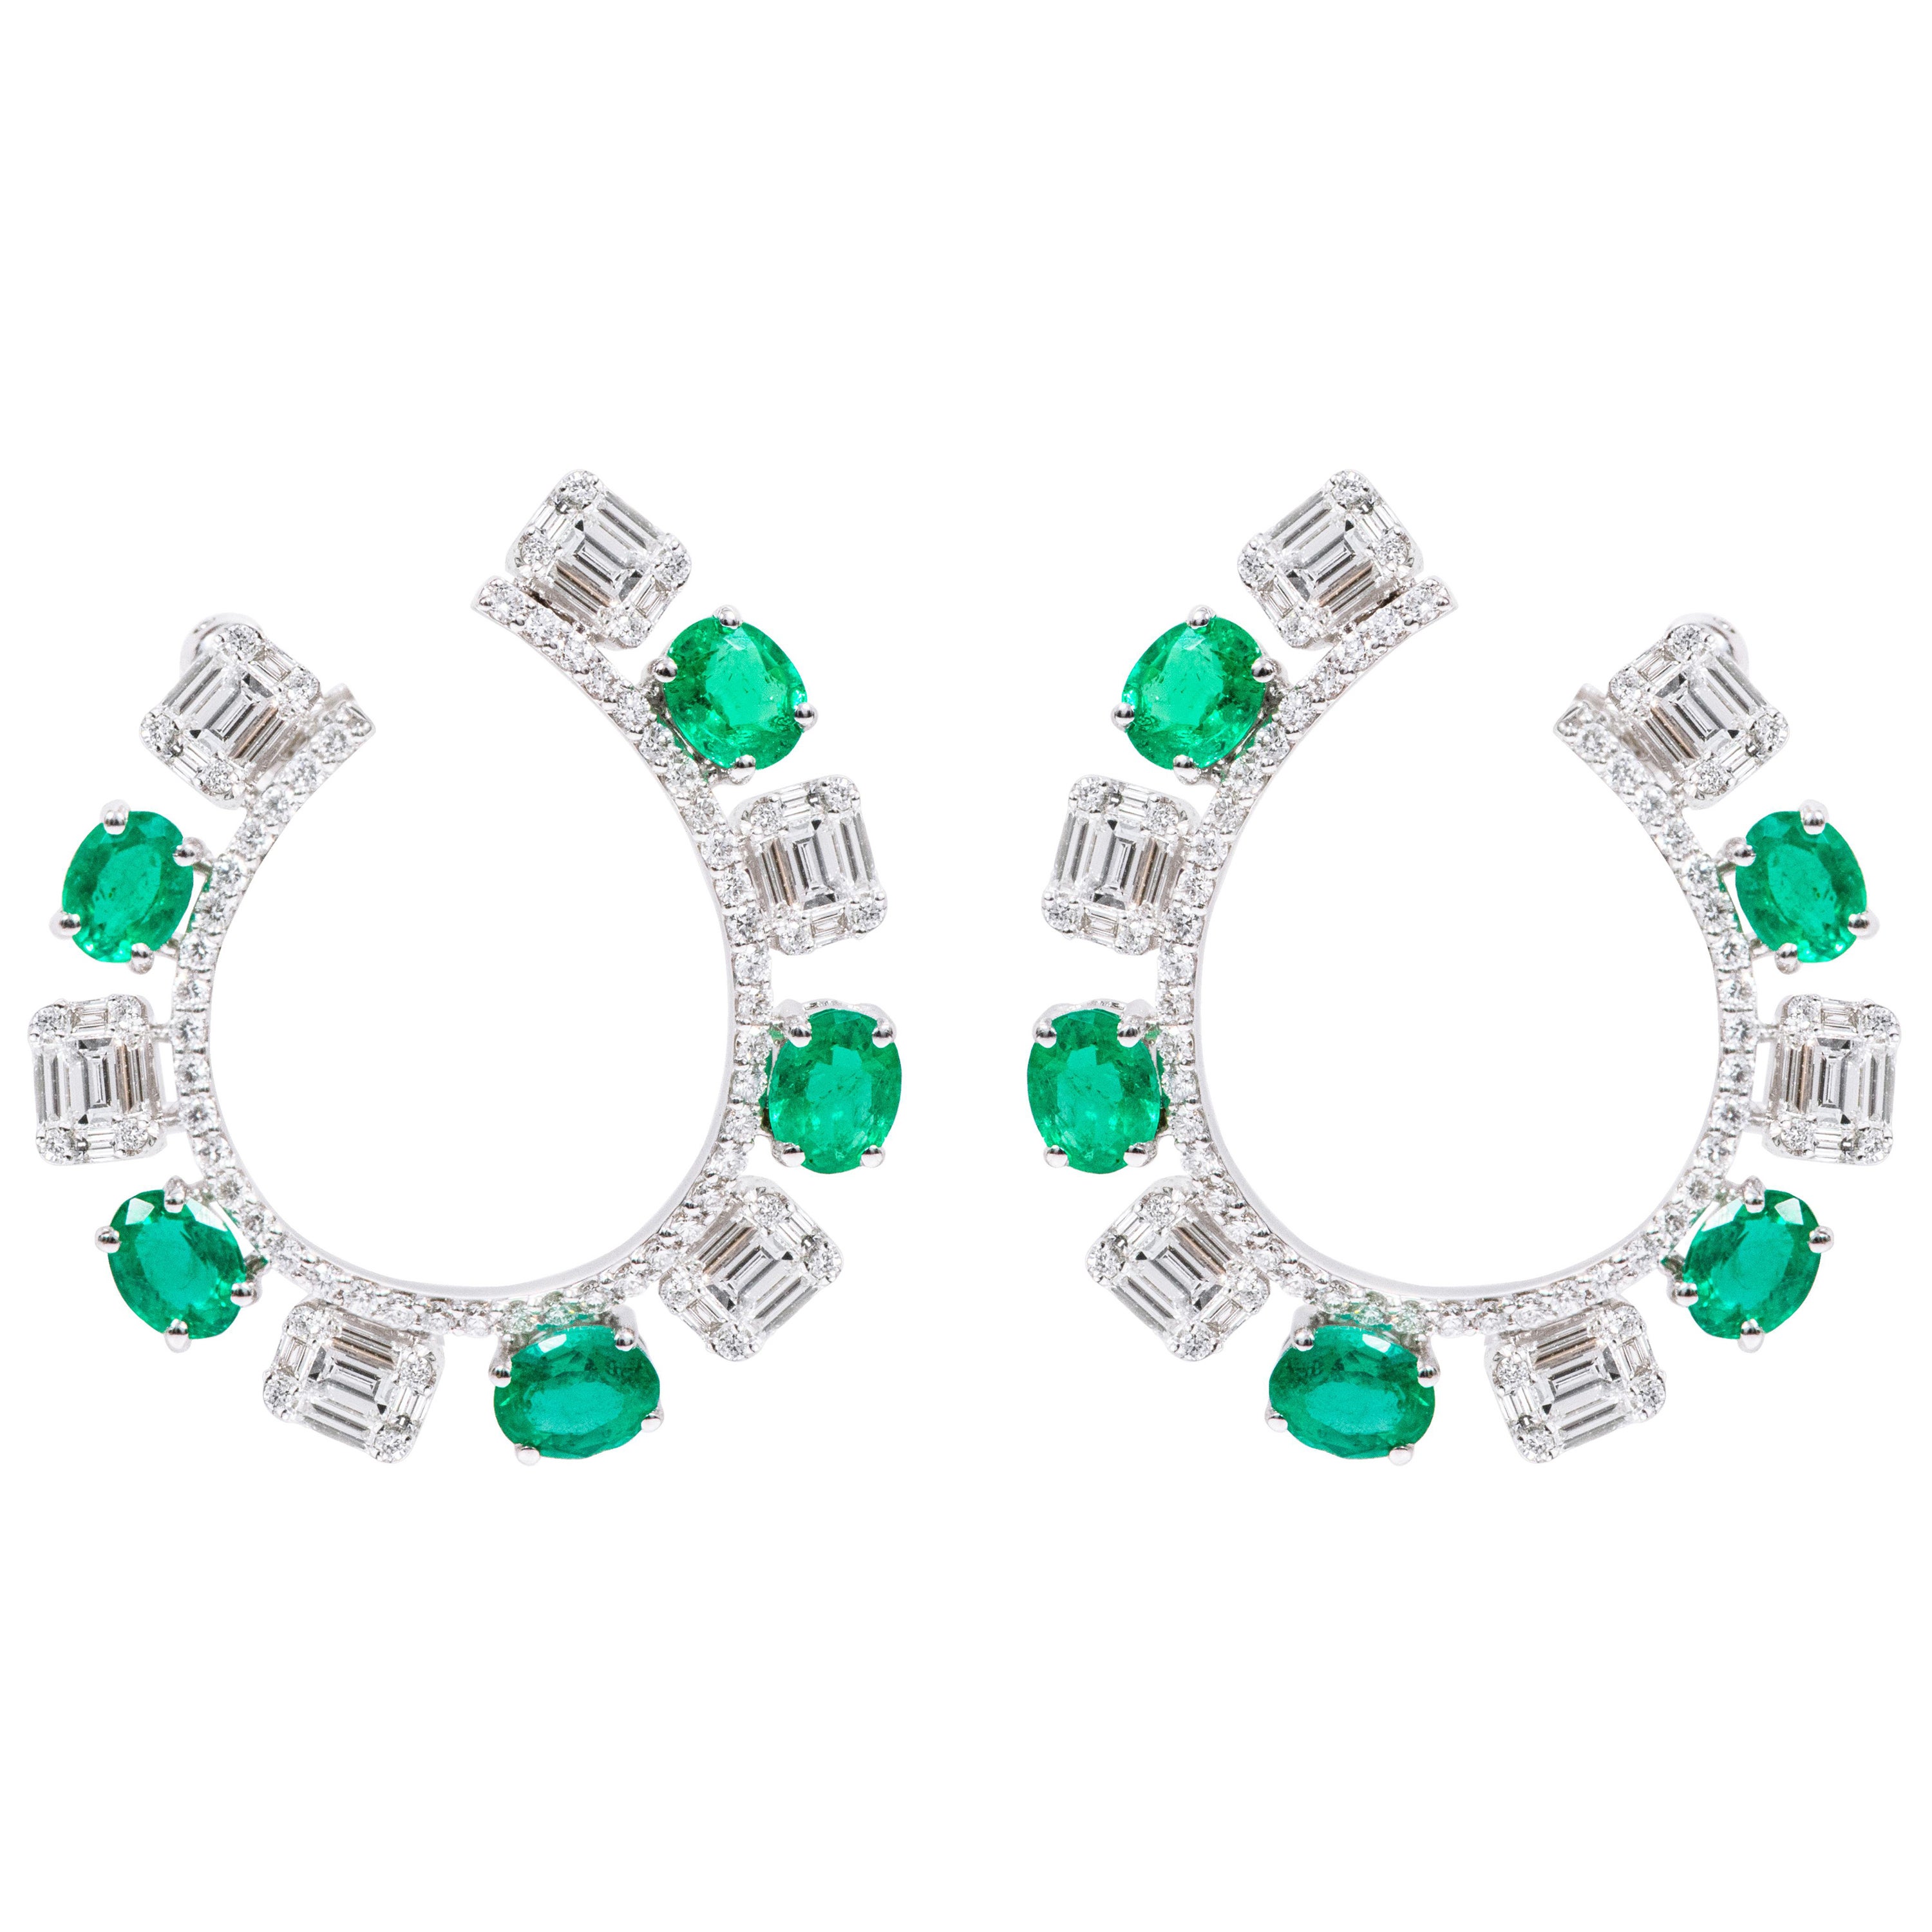 18 Karat White Gold 5.15 Carat Diamond and Natural Emerald Modified Hoop Earring For Sale